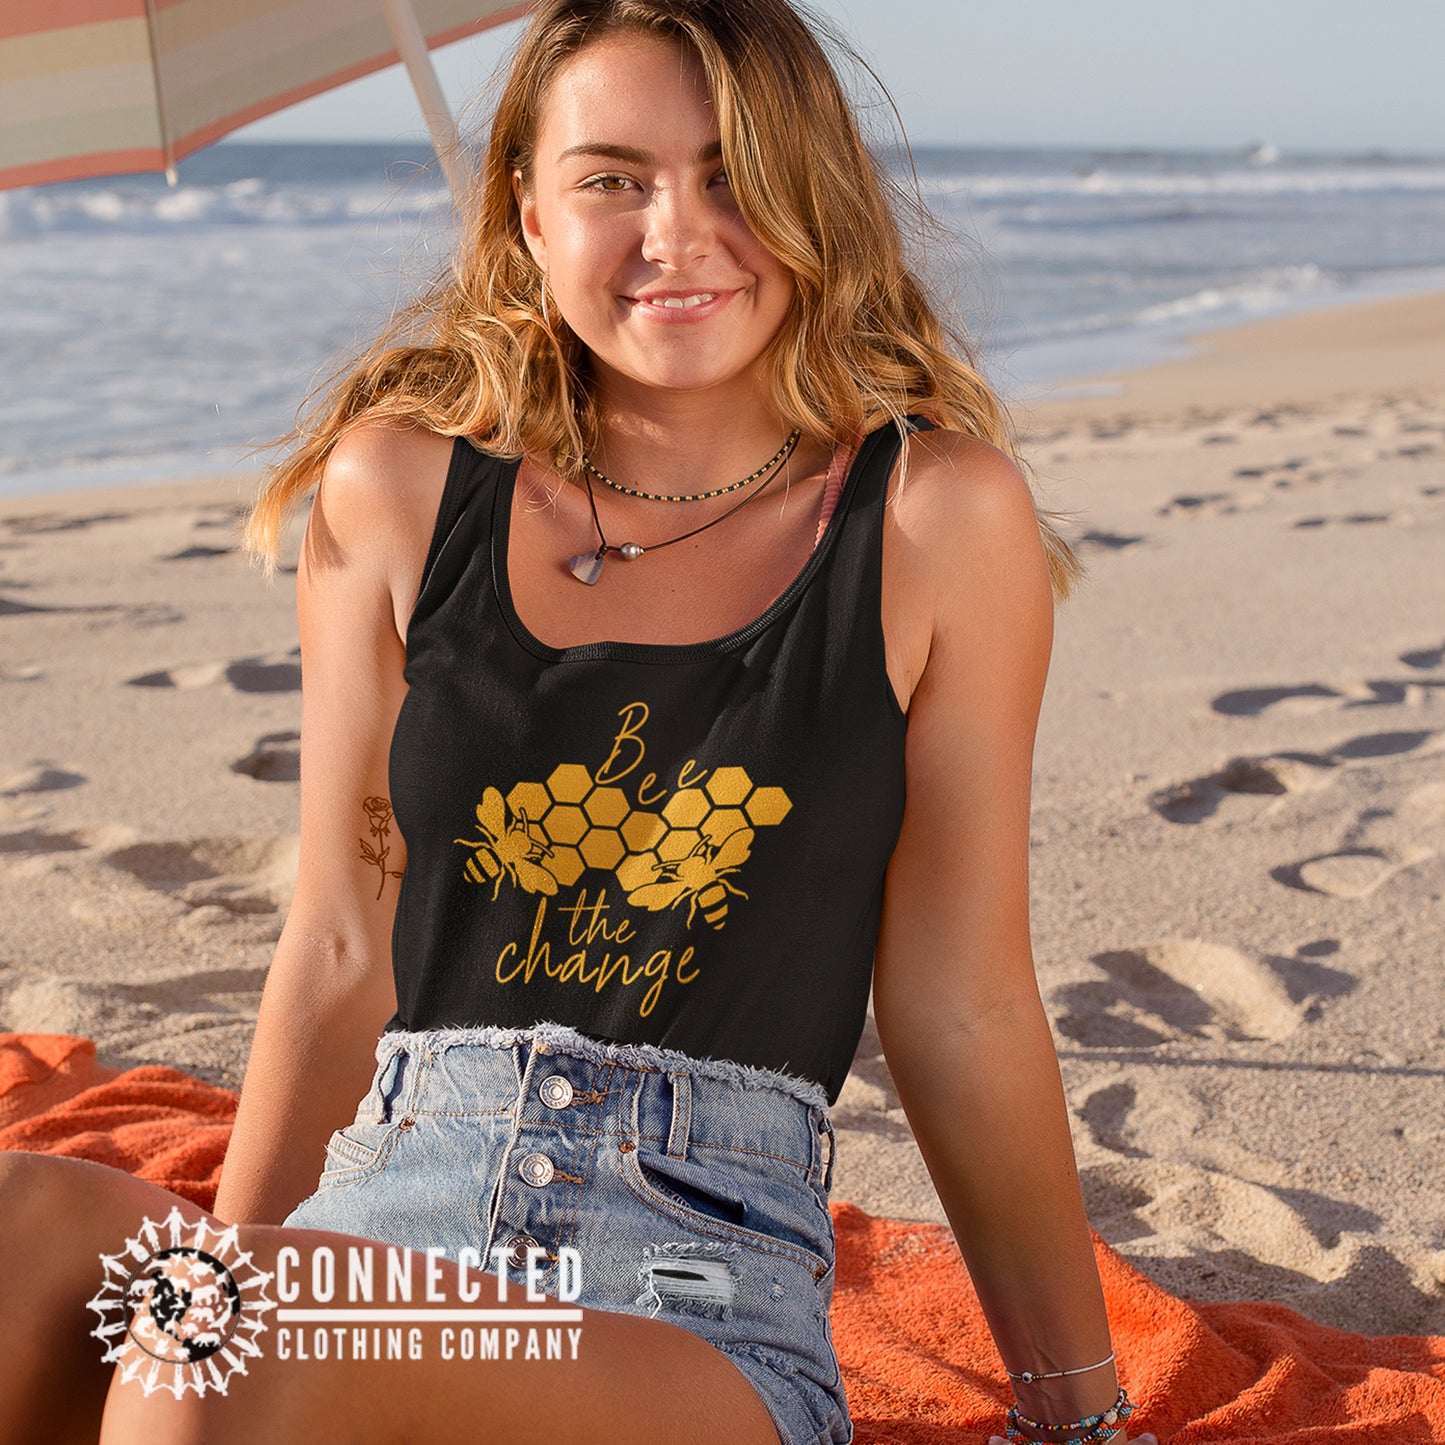 Model Wearing Black Bee The Change Women's Tank - Connected Clothing Company - 10% of profits donated to the Honeybee Conservancy